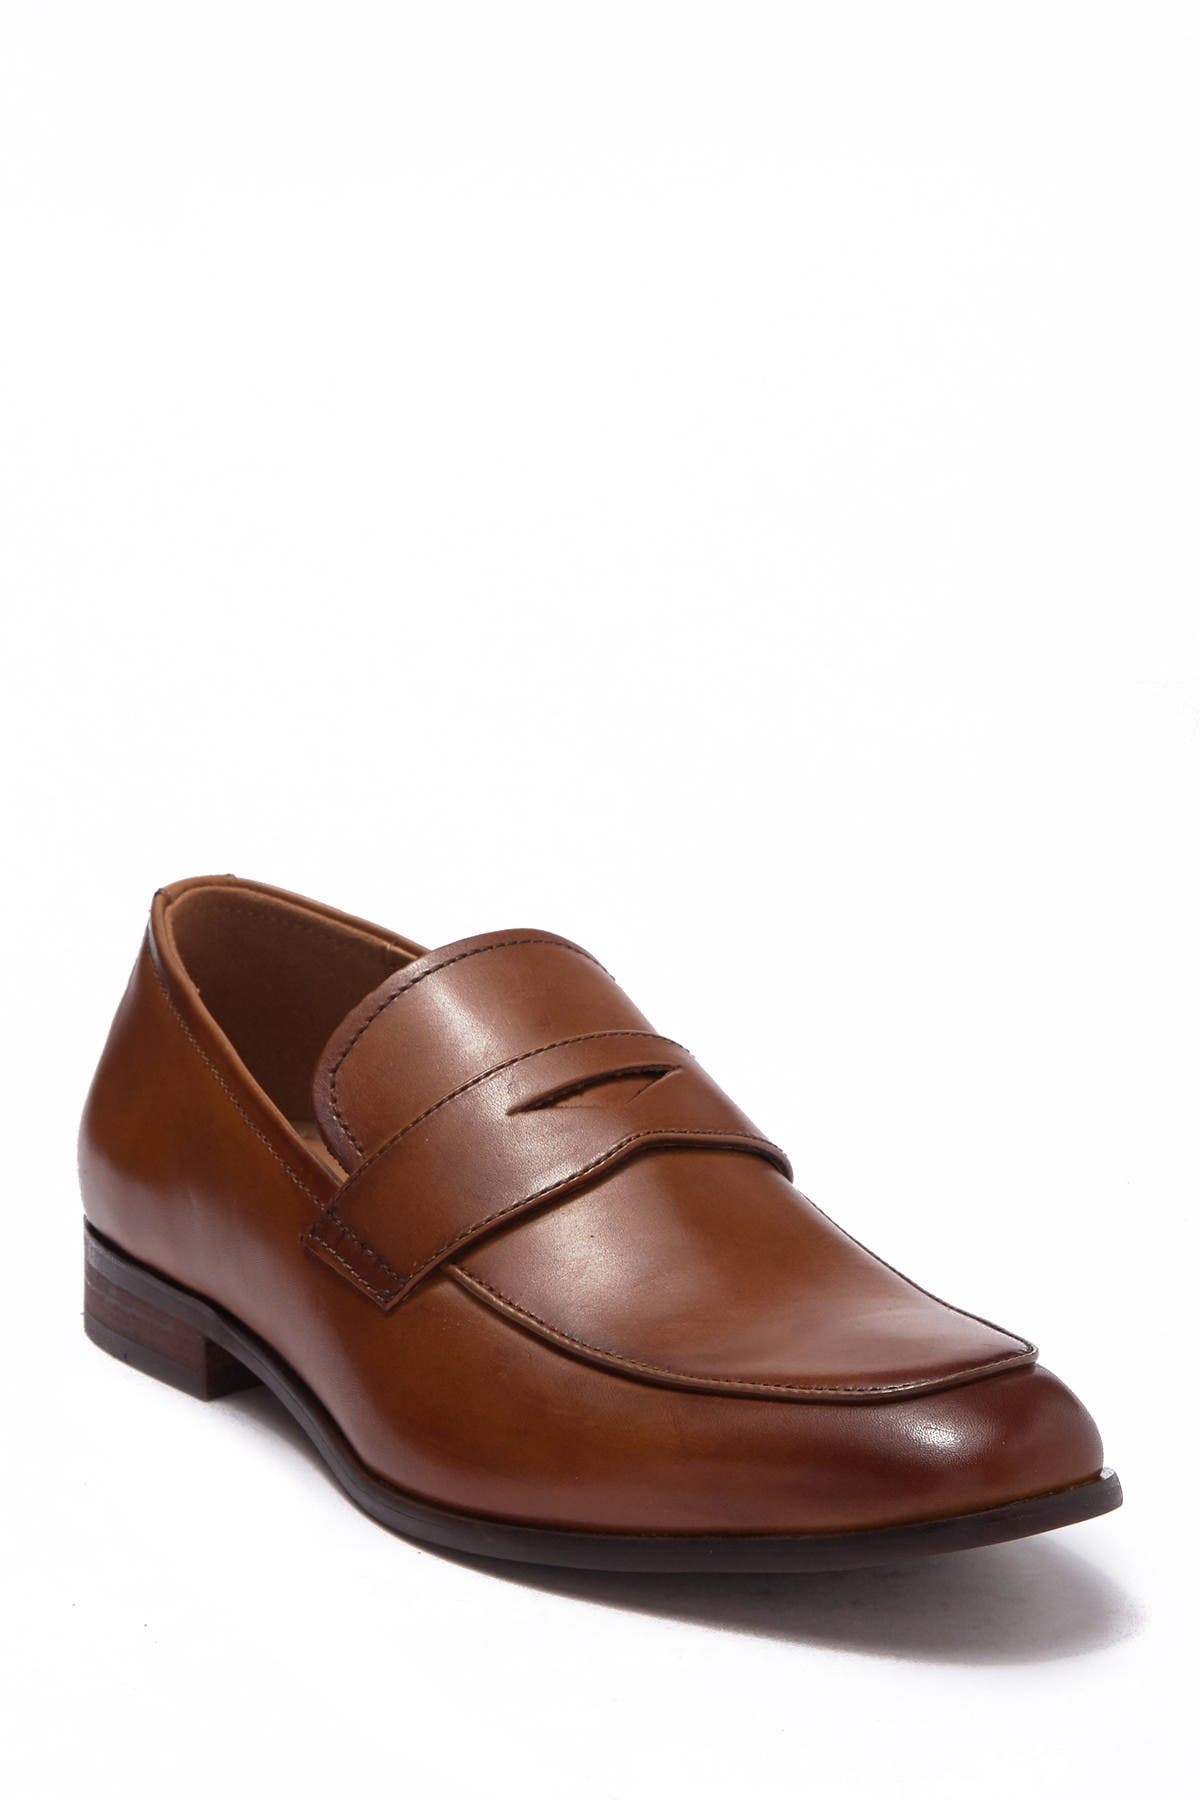 leather penny loafer